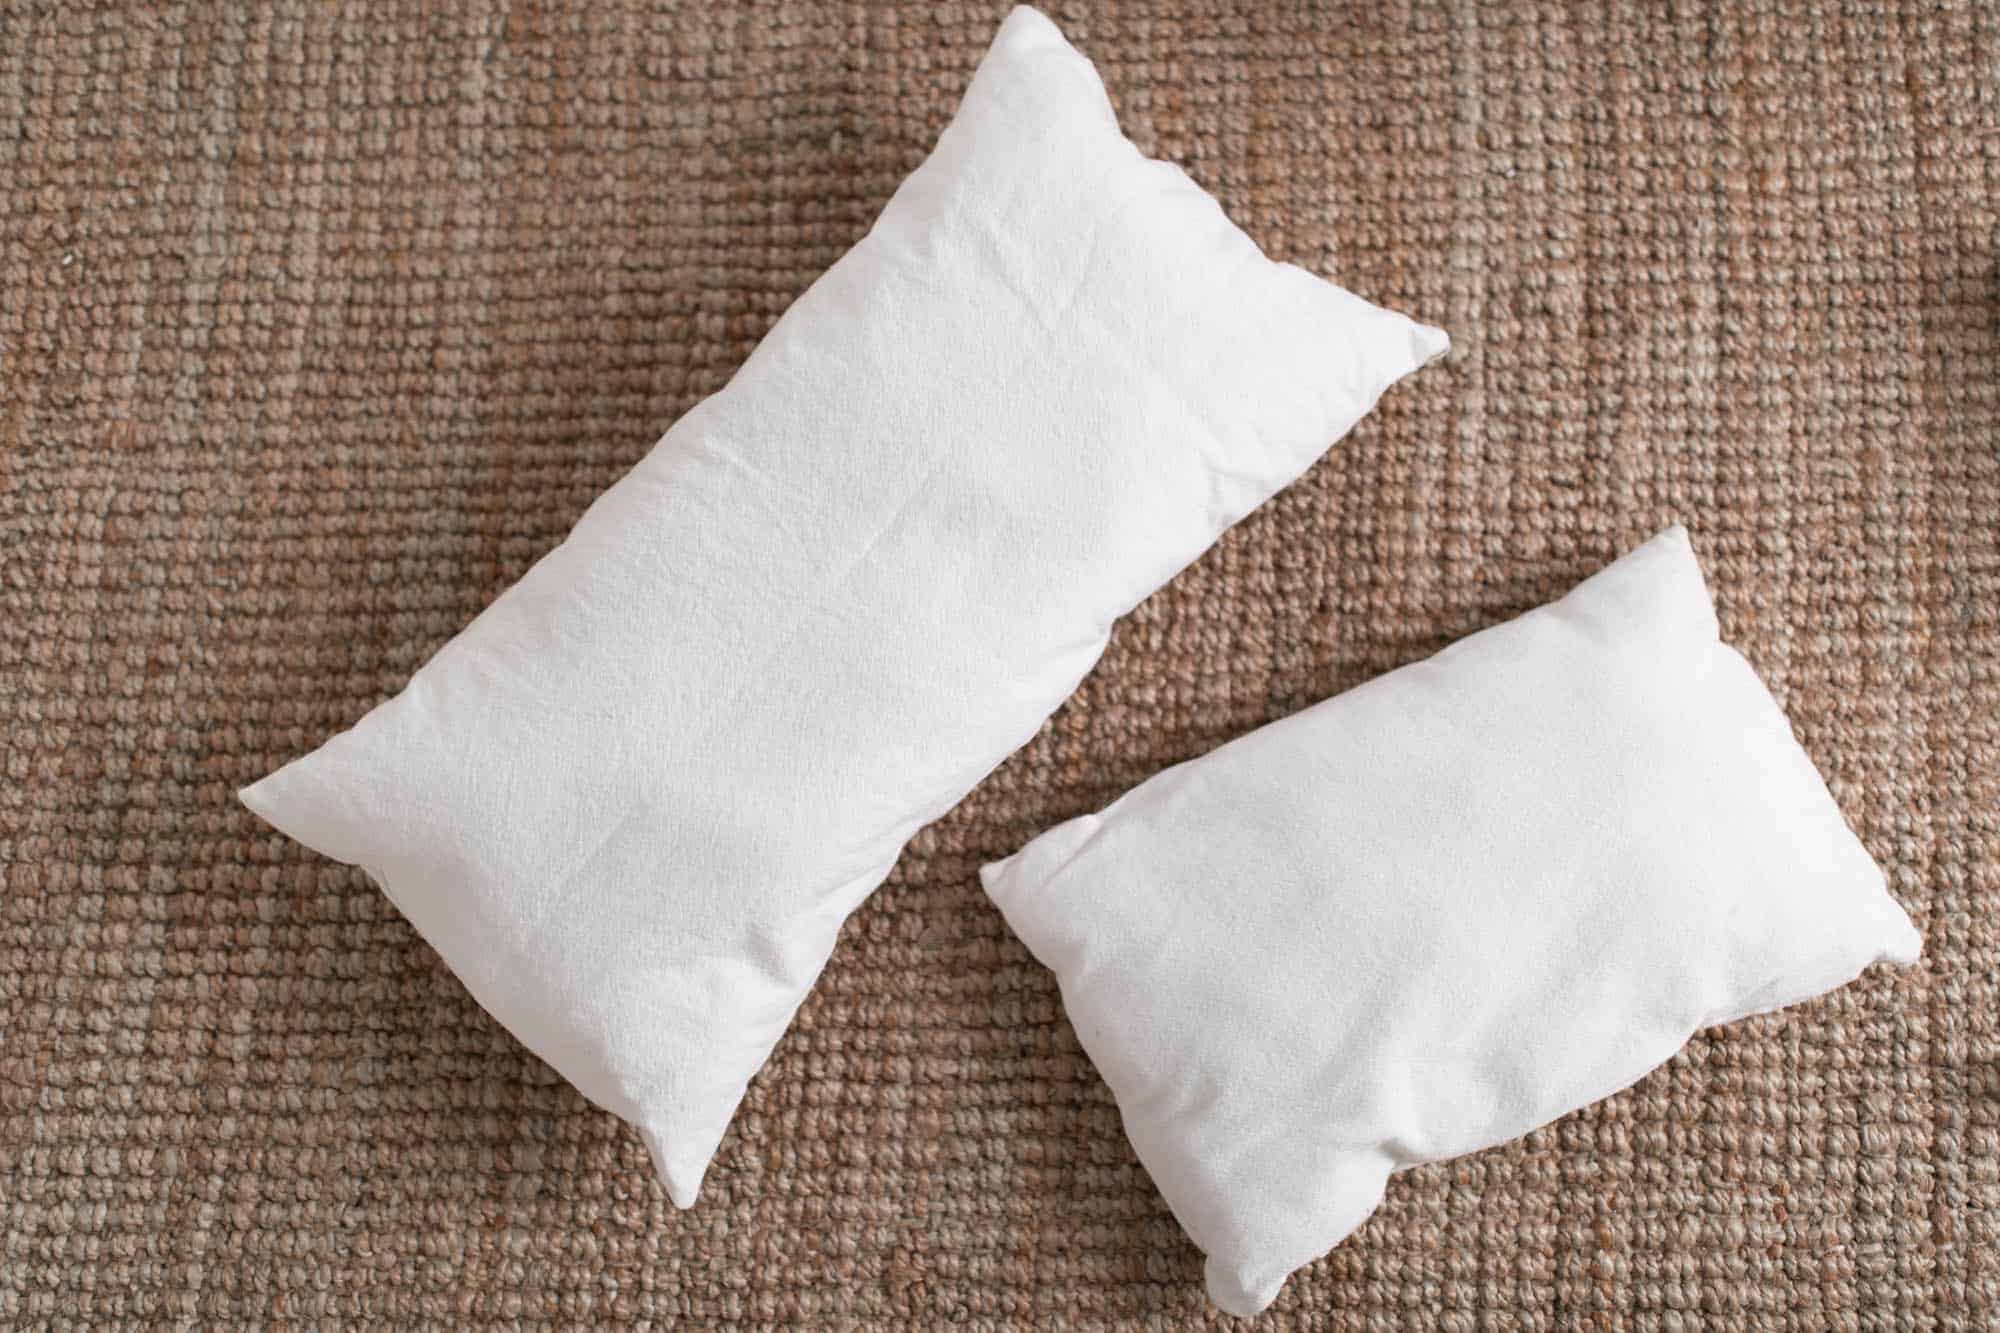 Learn how to make a pillow insert in any size out of drop cloth with this video tutorial.